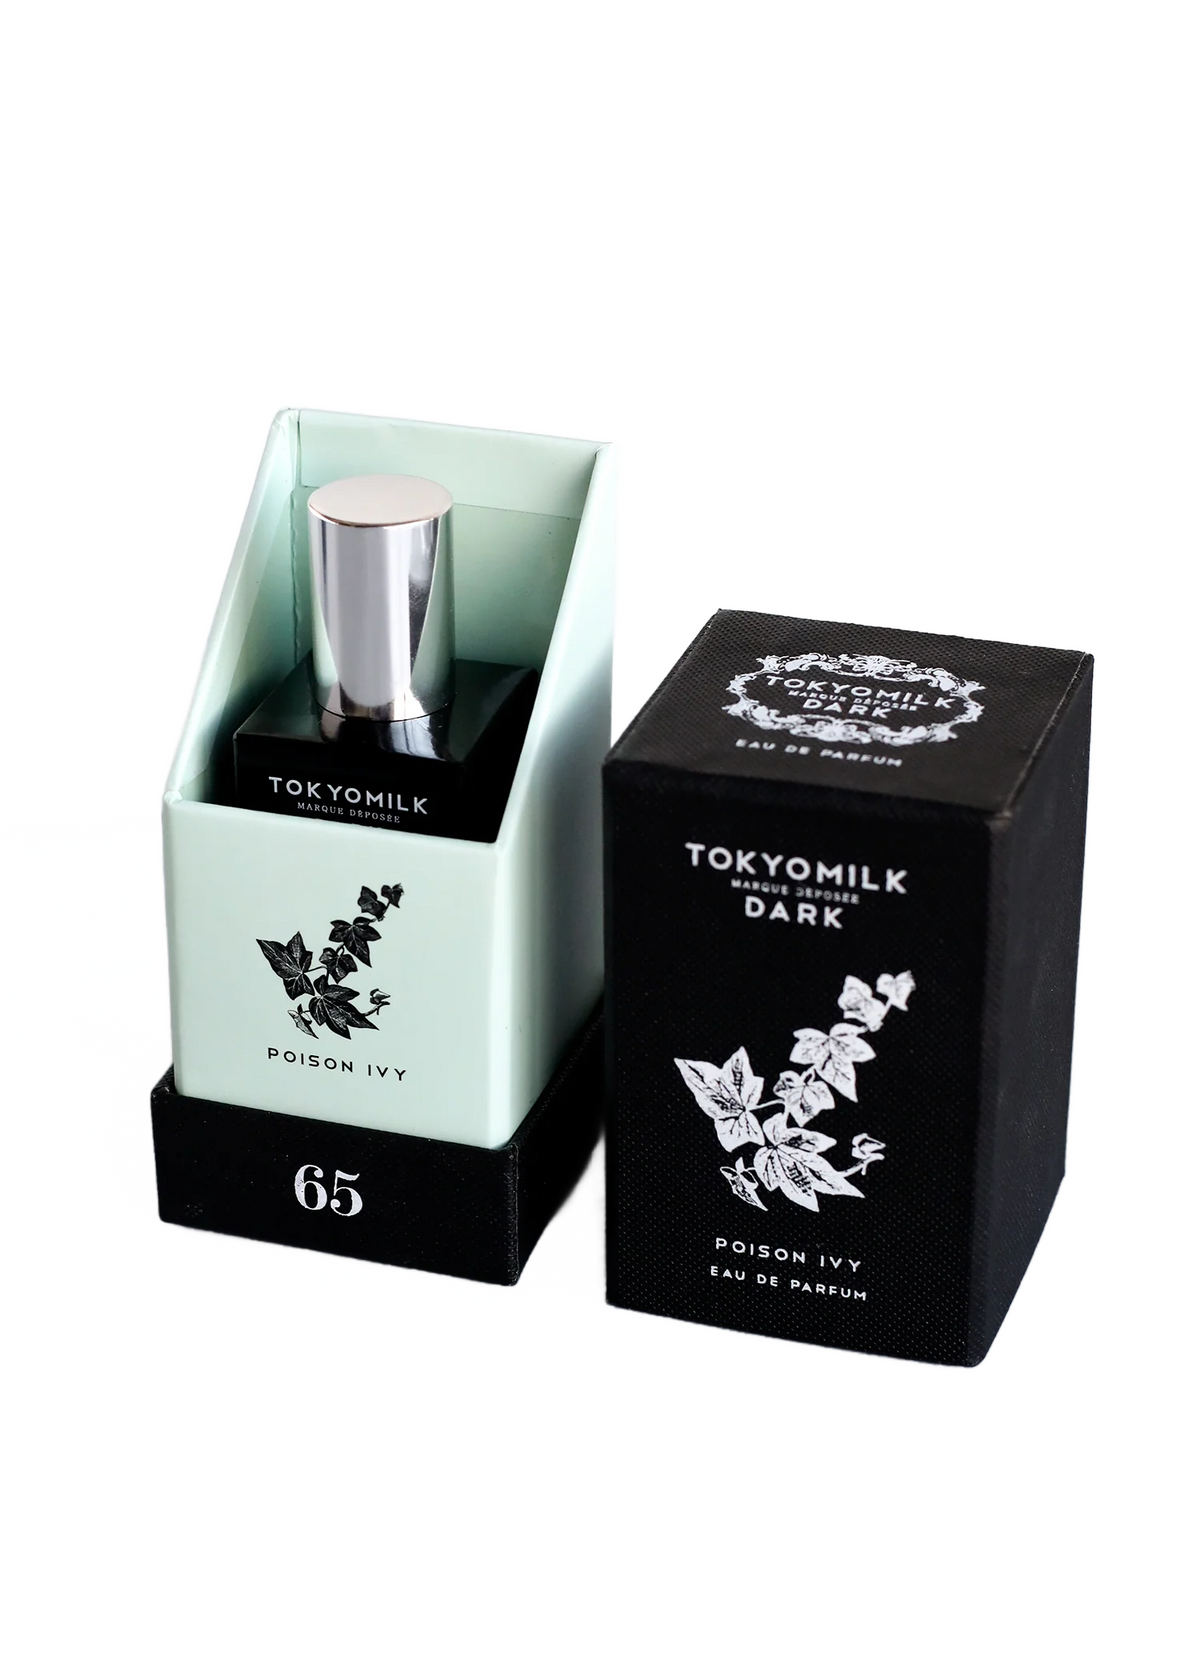 Bottle of "Margot Elena TokyoMilk Dark Poison Ivy No. 65 Eau de Parfum" perfume in a pale green container with a metallic cap, placed next to its black packaging box adorned with white floral and orris root graphics